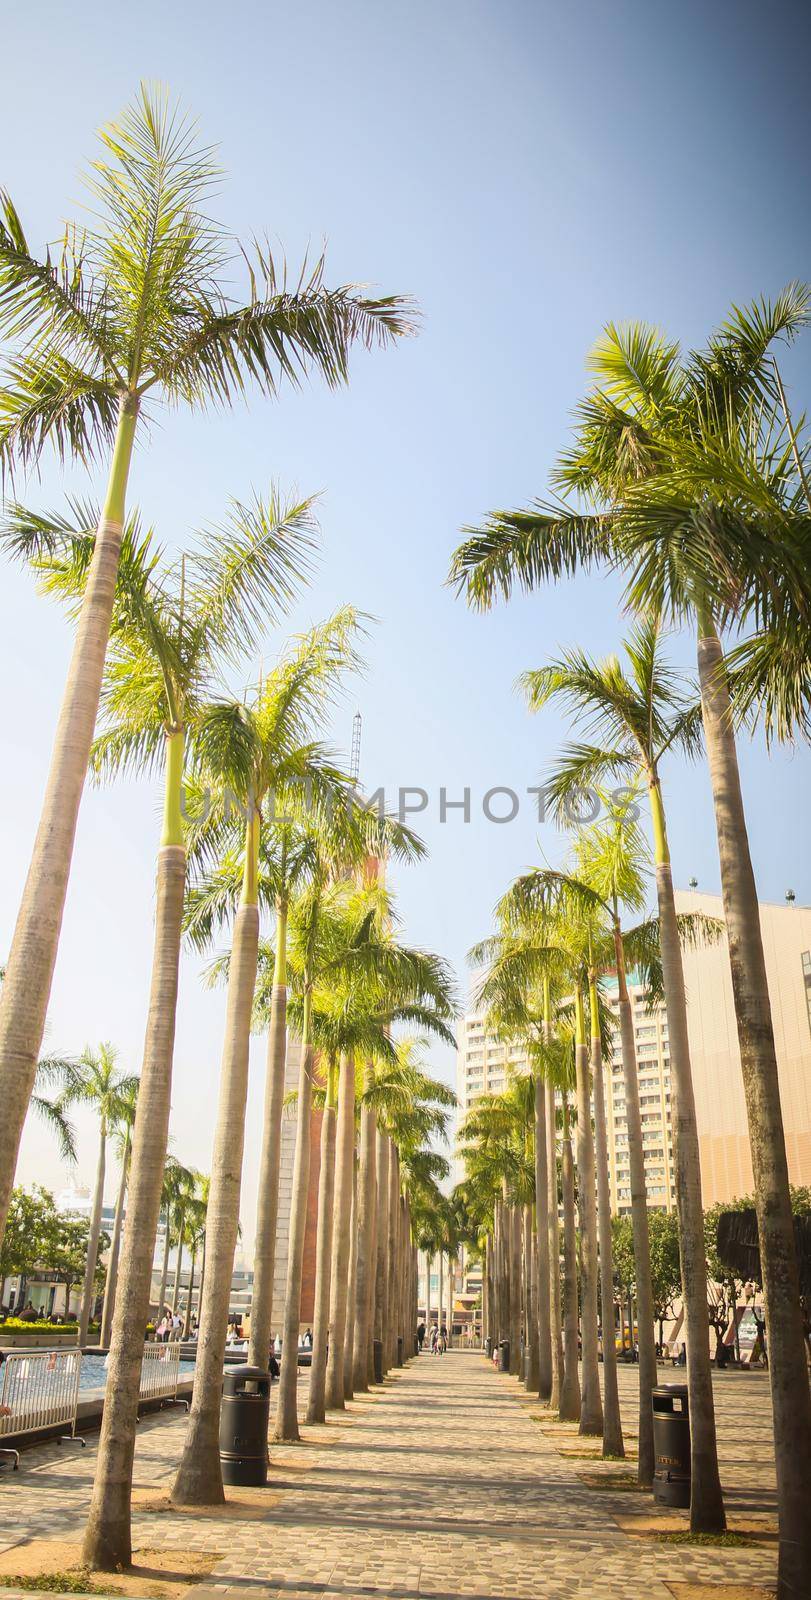 A green alley of palms in Hong Kong. Architectural sights of the city and the street. by DovidPro